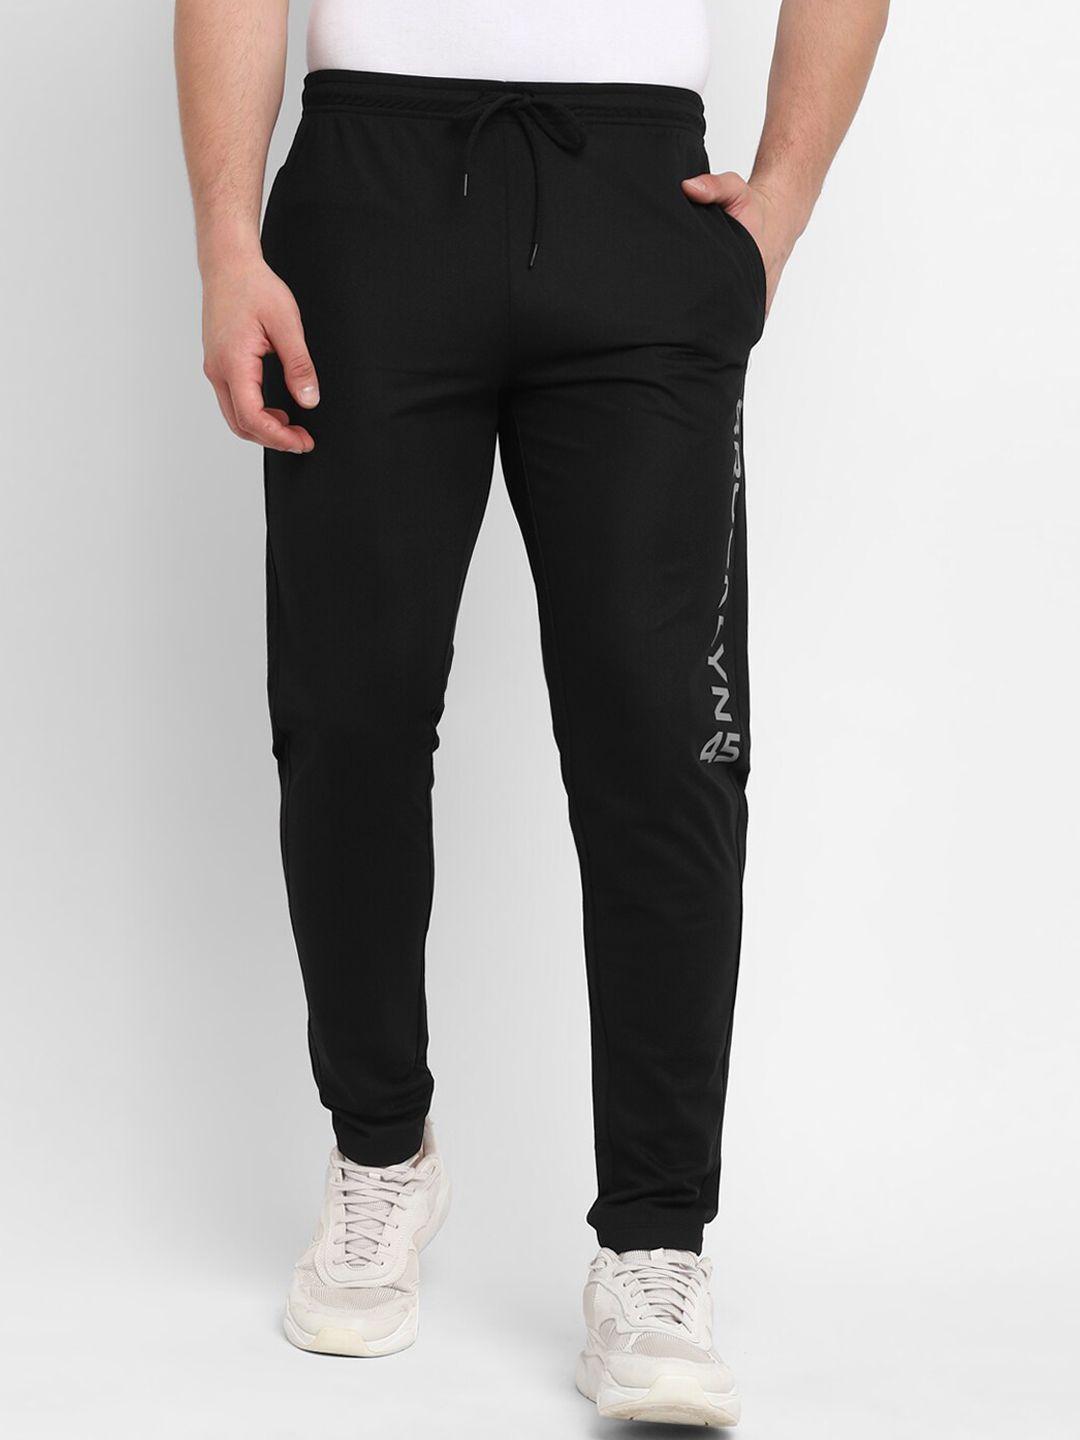 off limits men typography printed joggers